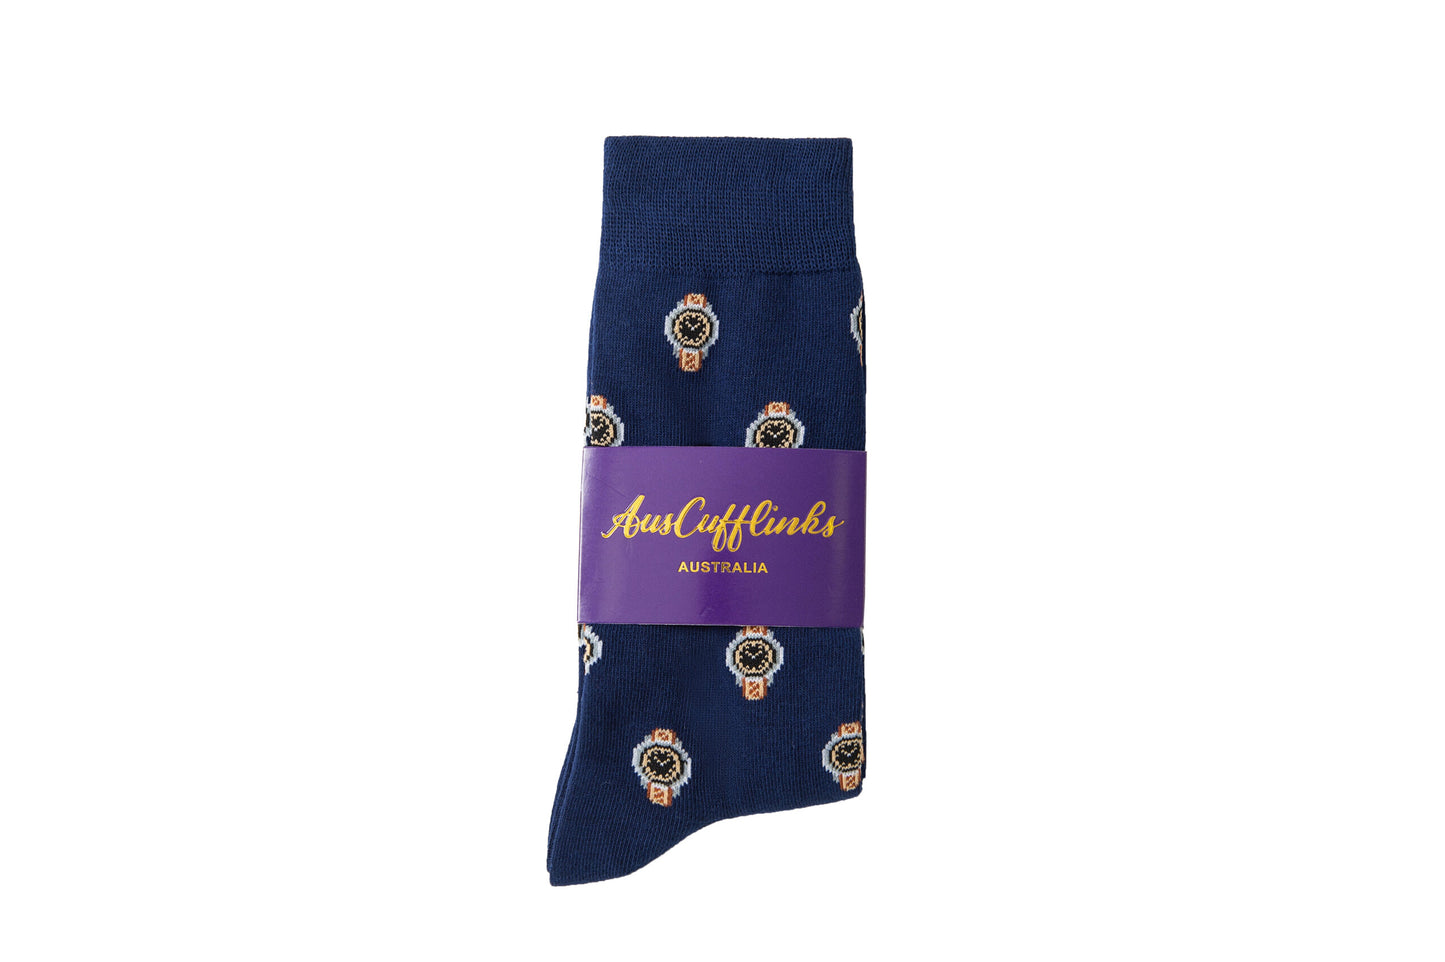 Navy blue Watch Socks with purple band labeled "auscufflinks australia" and patterned with a timeless gold crest design.